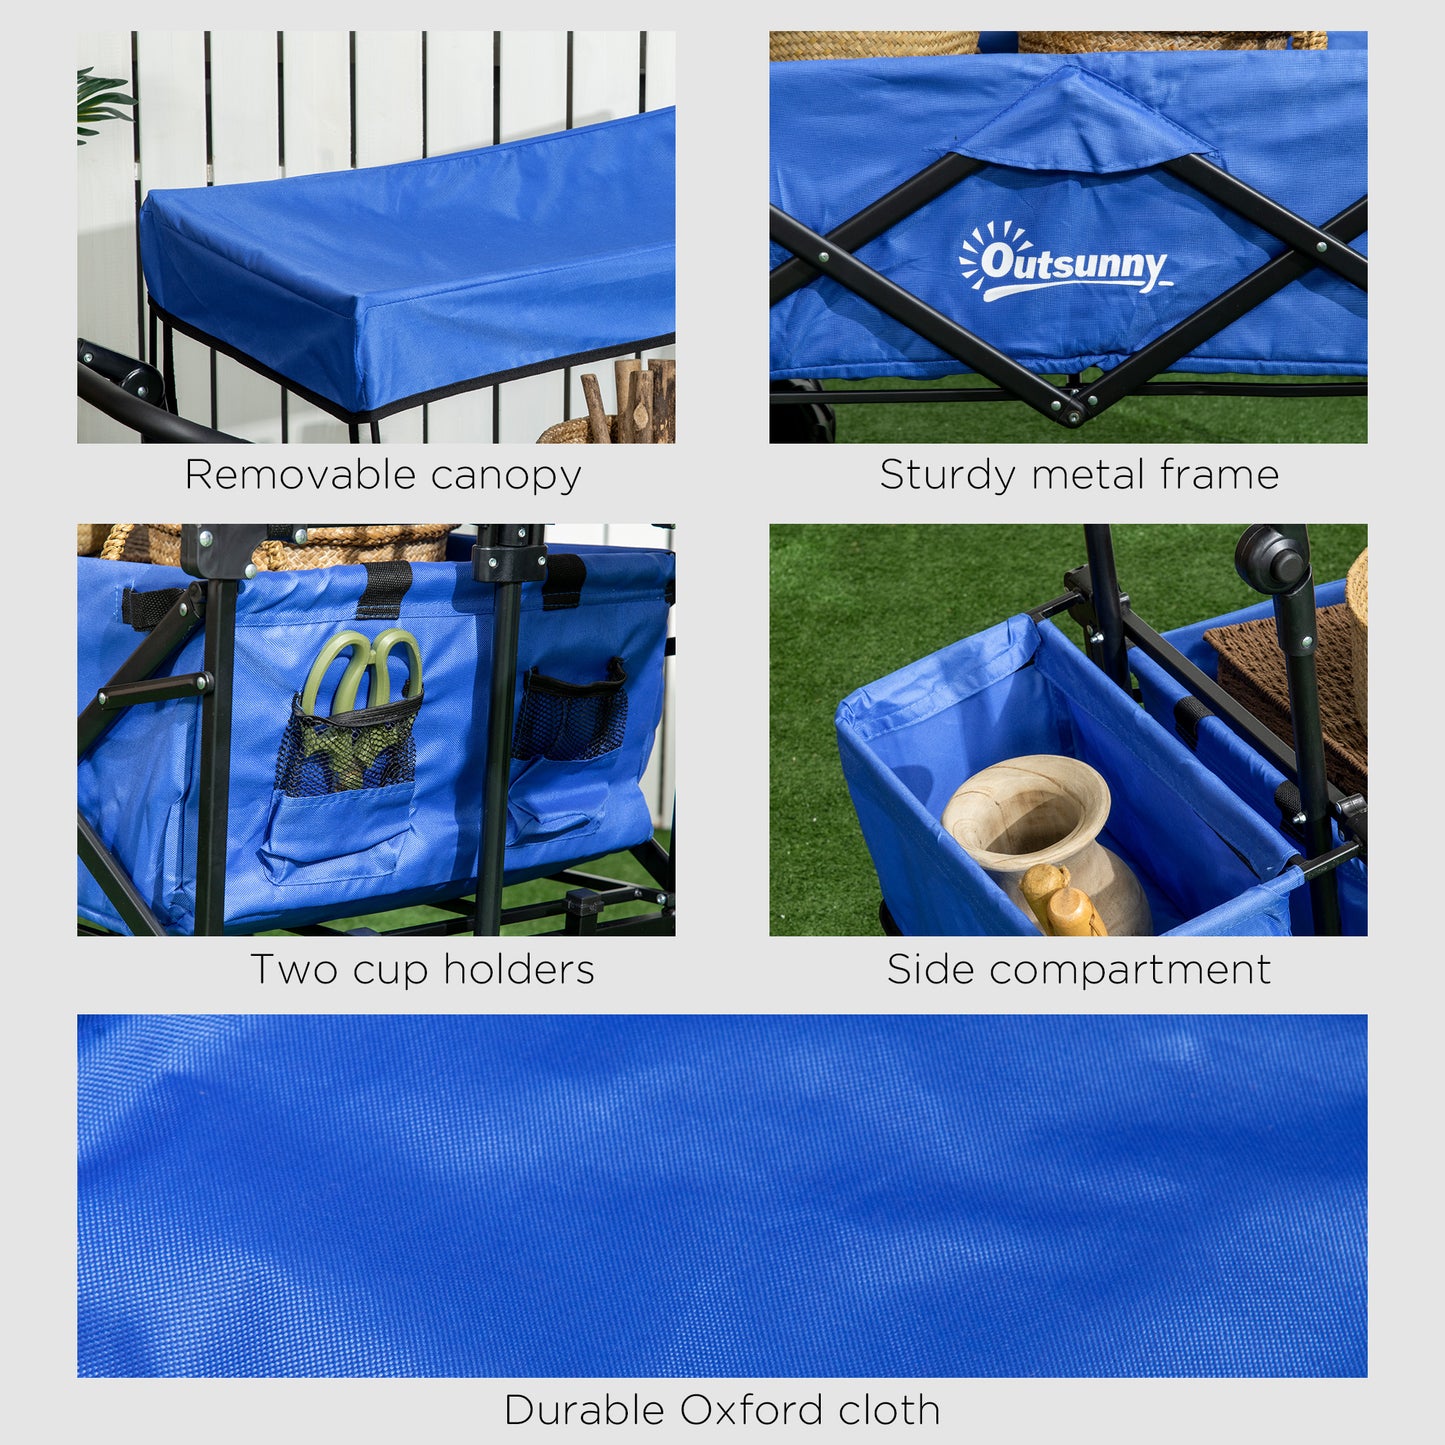 Outsunny Folding Trolley Cart Storage Wagon Beach Trailer 4 Wheels with Handle Overhead Canopy Cart Push Pull for Camping, Blue